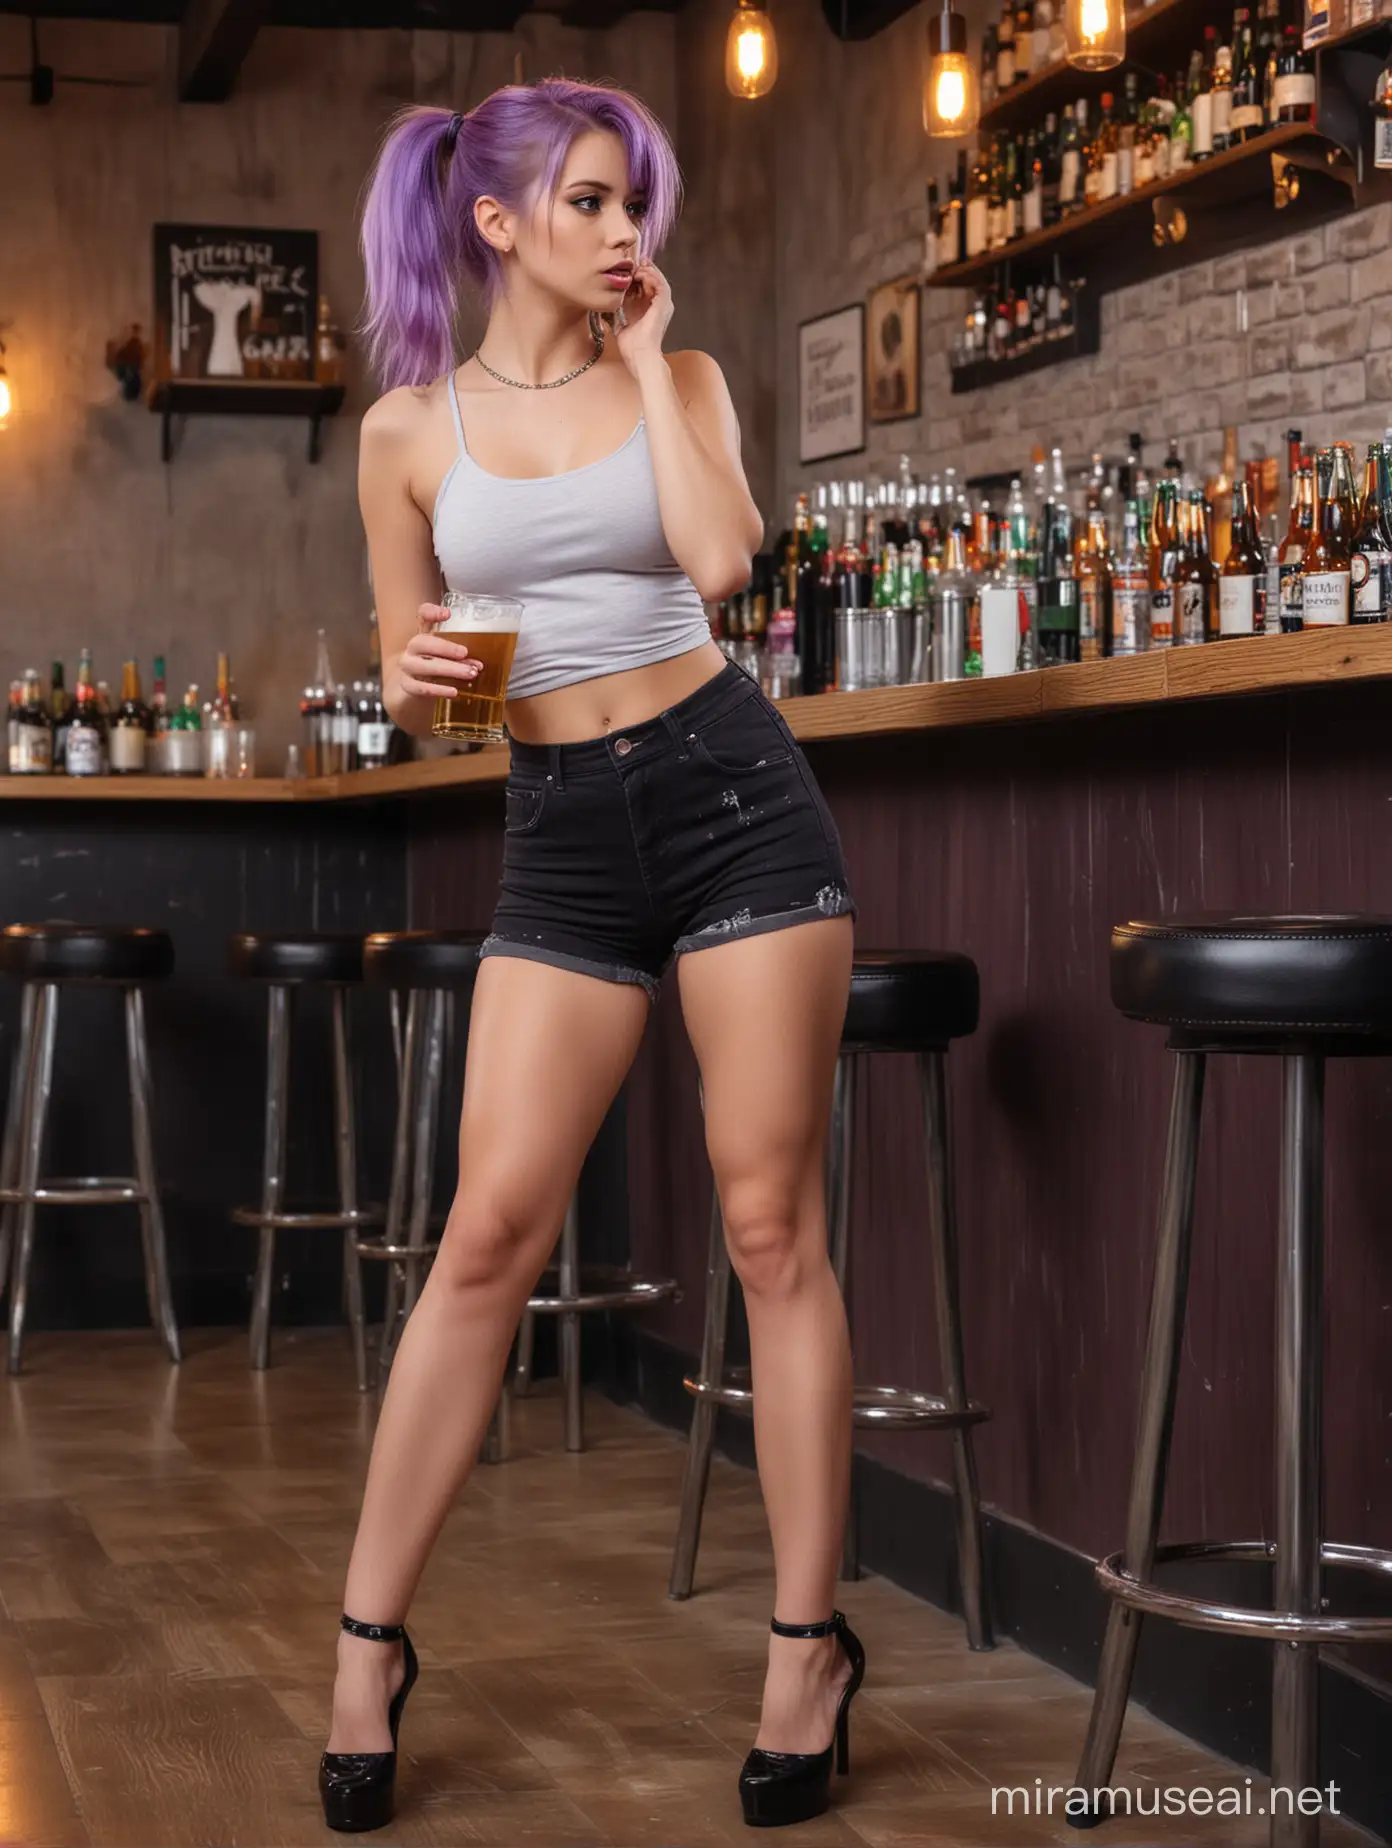 Drunk Girl Drinking Beer by the Bar Counter